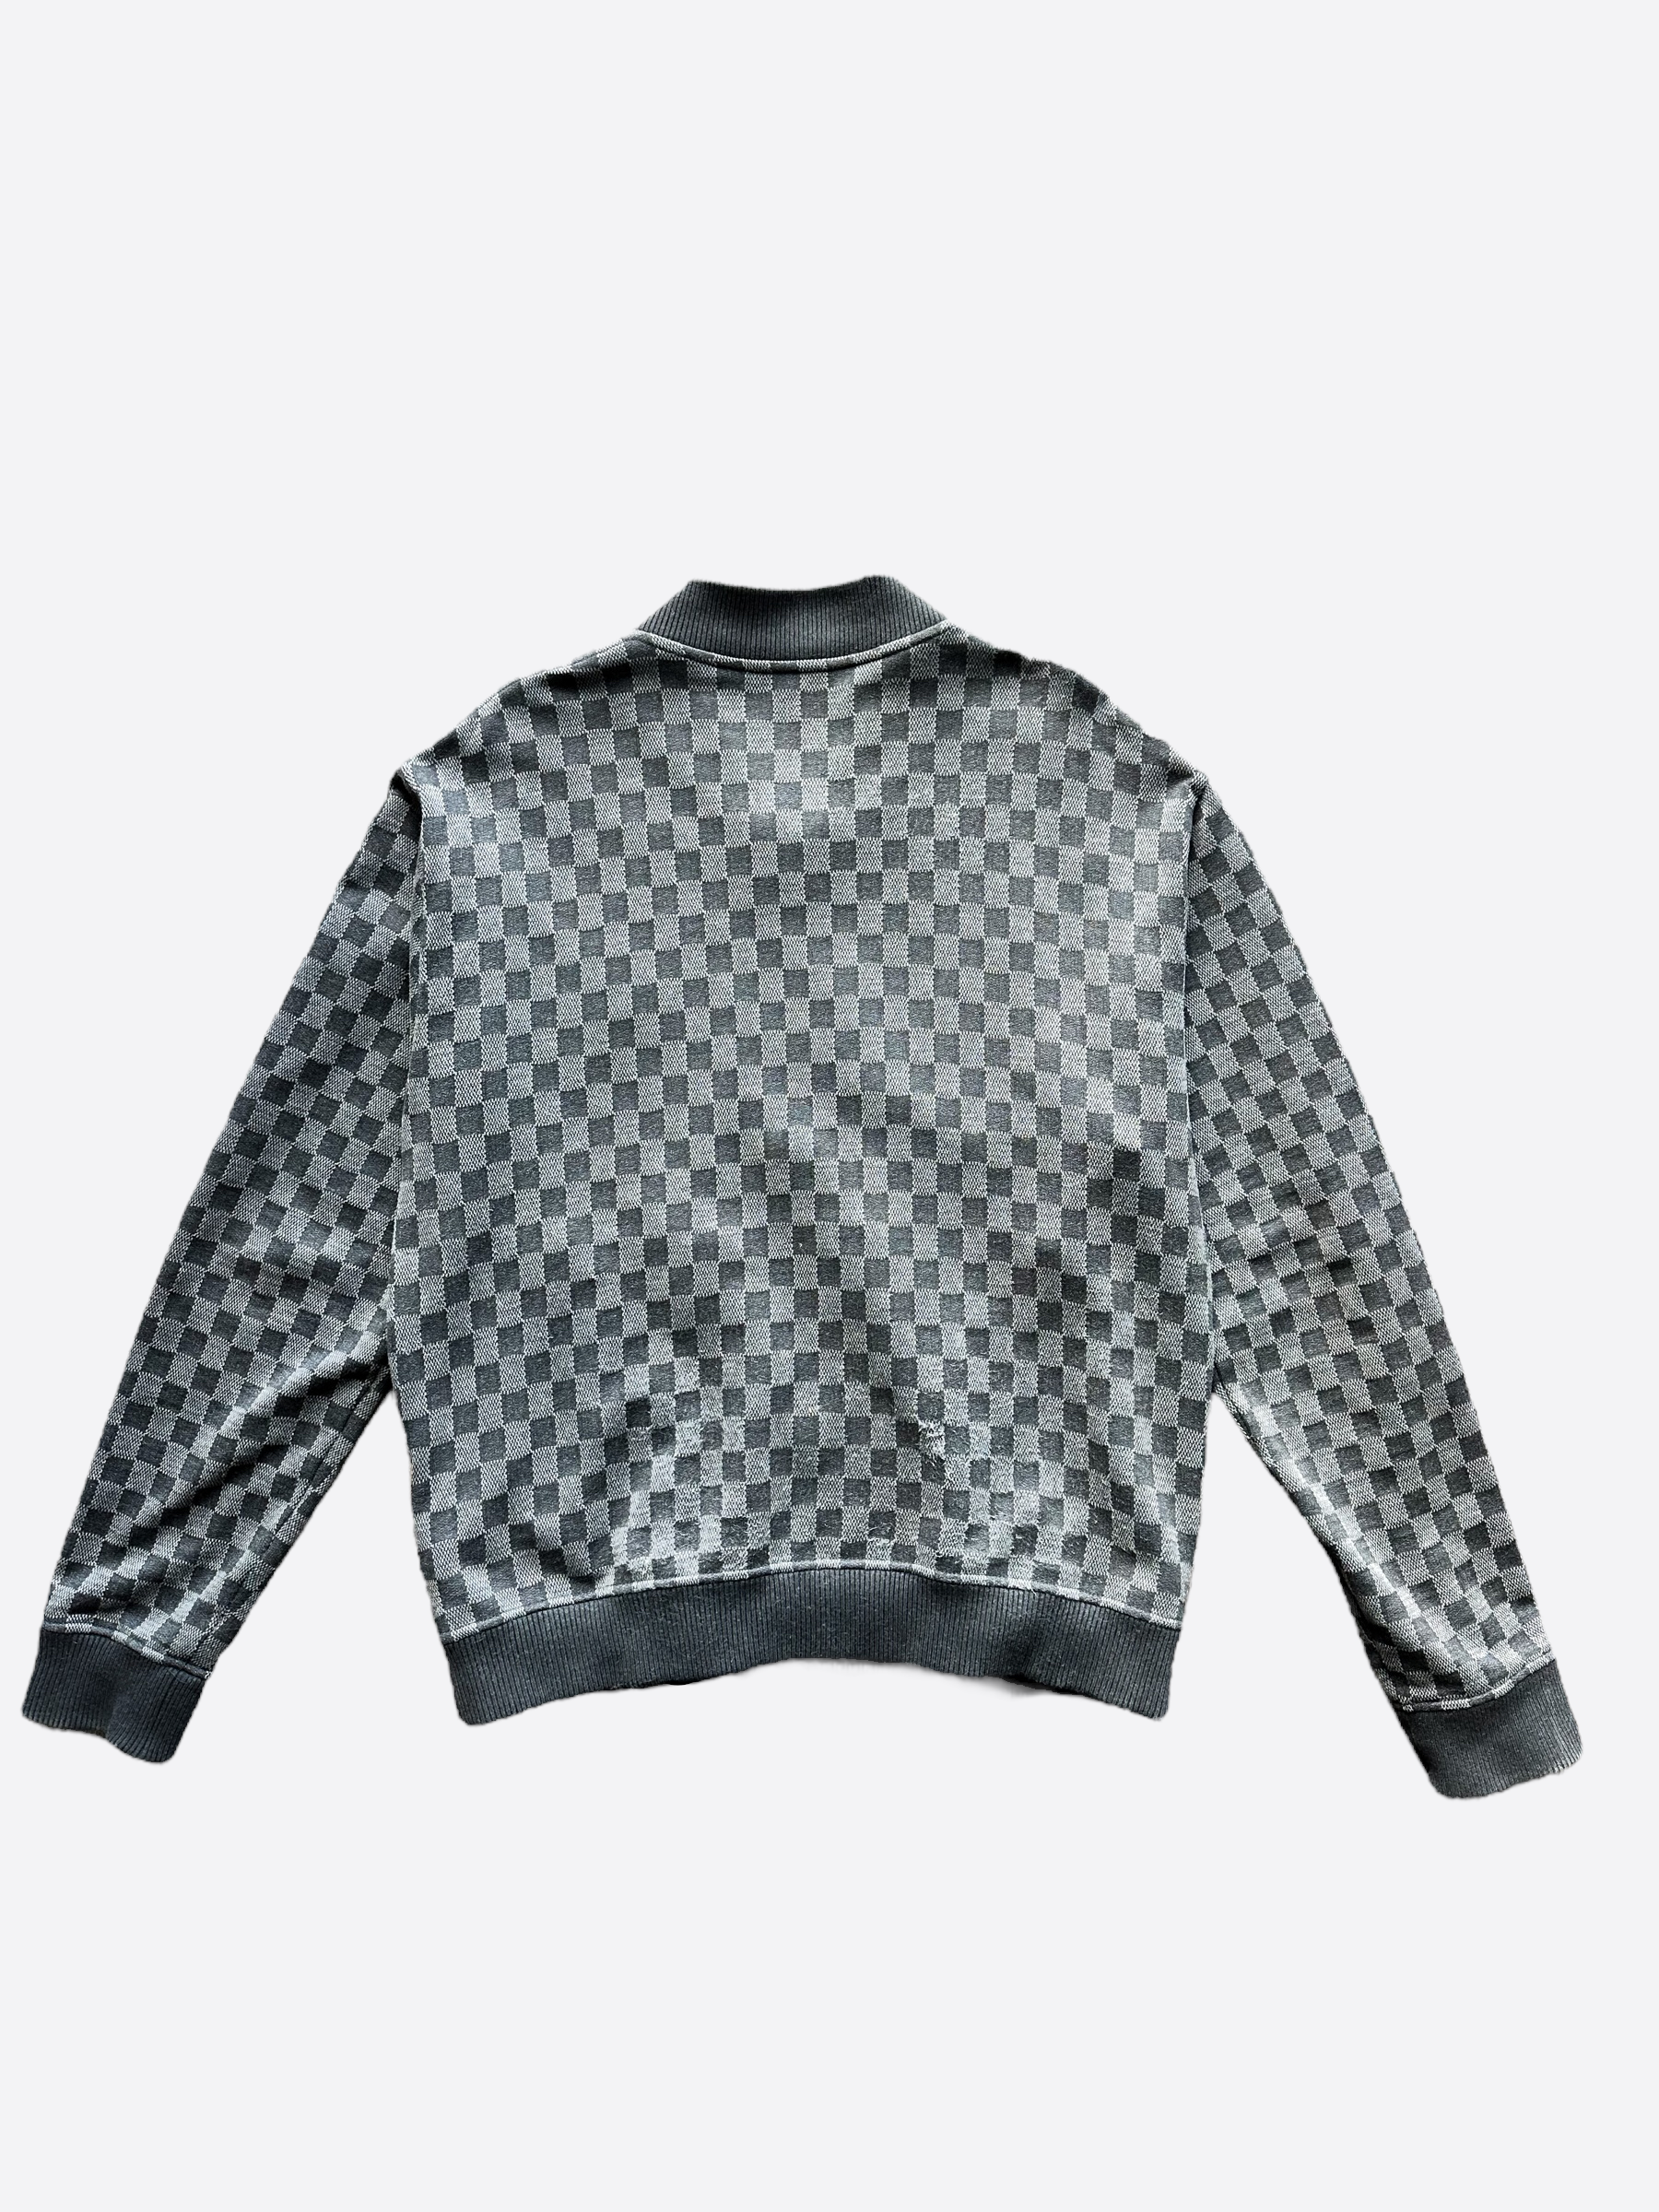 Louis Vuitton Quilted Damier Zip-Up Jacket BLACK. Size S0